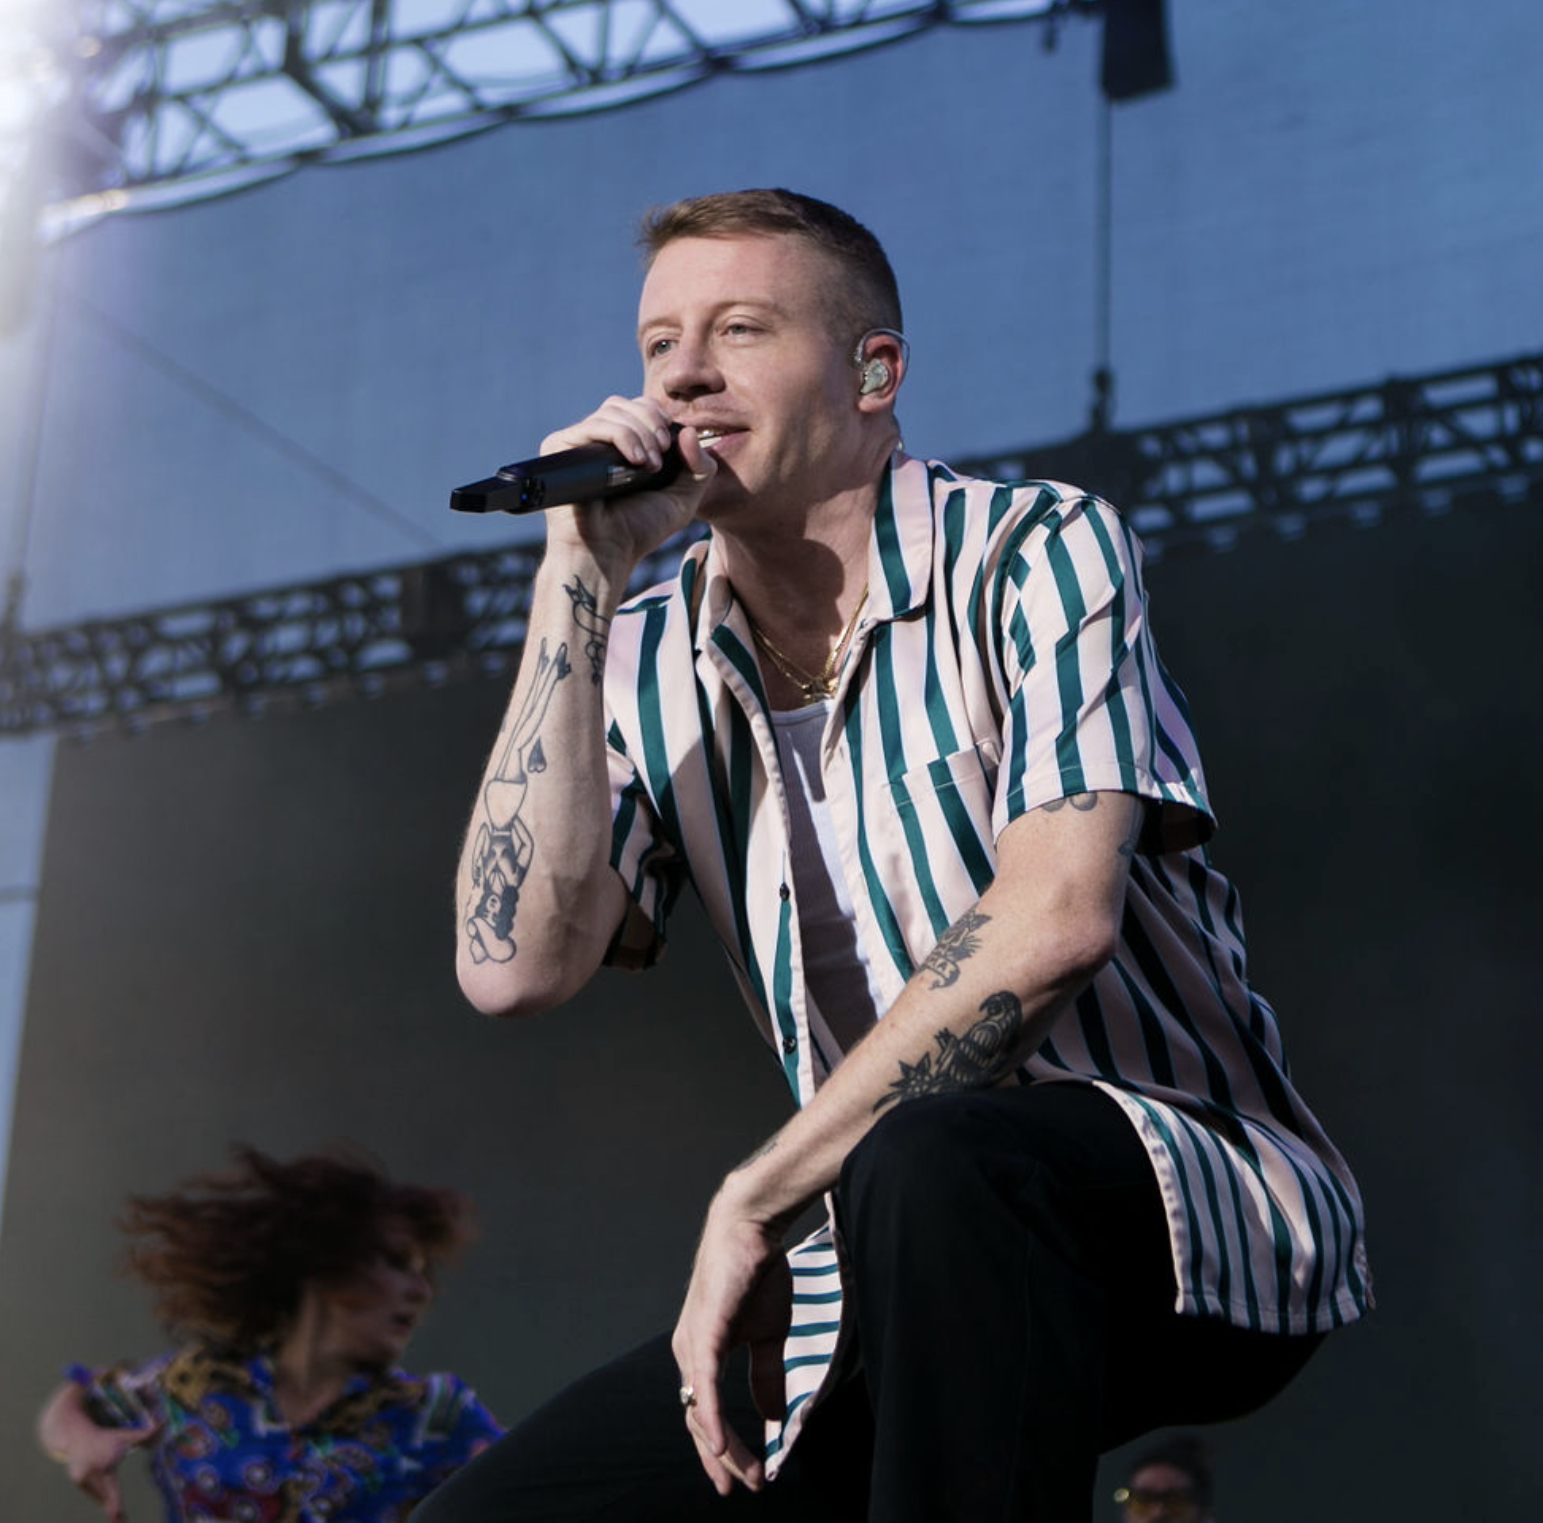 Special performances by macklemore at zoomtopia user conference